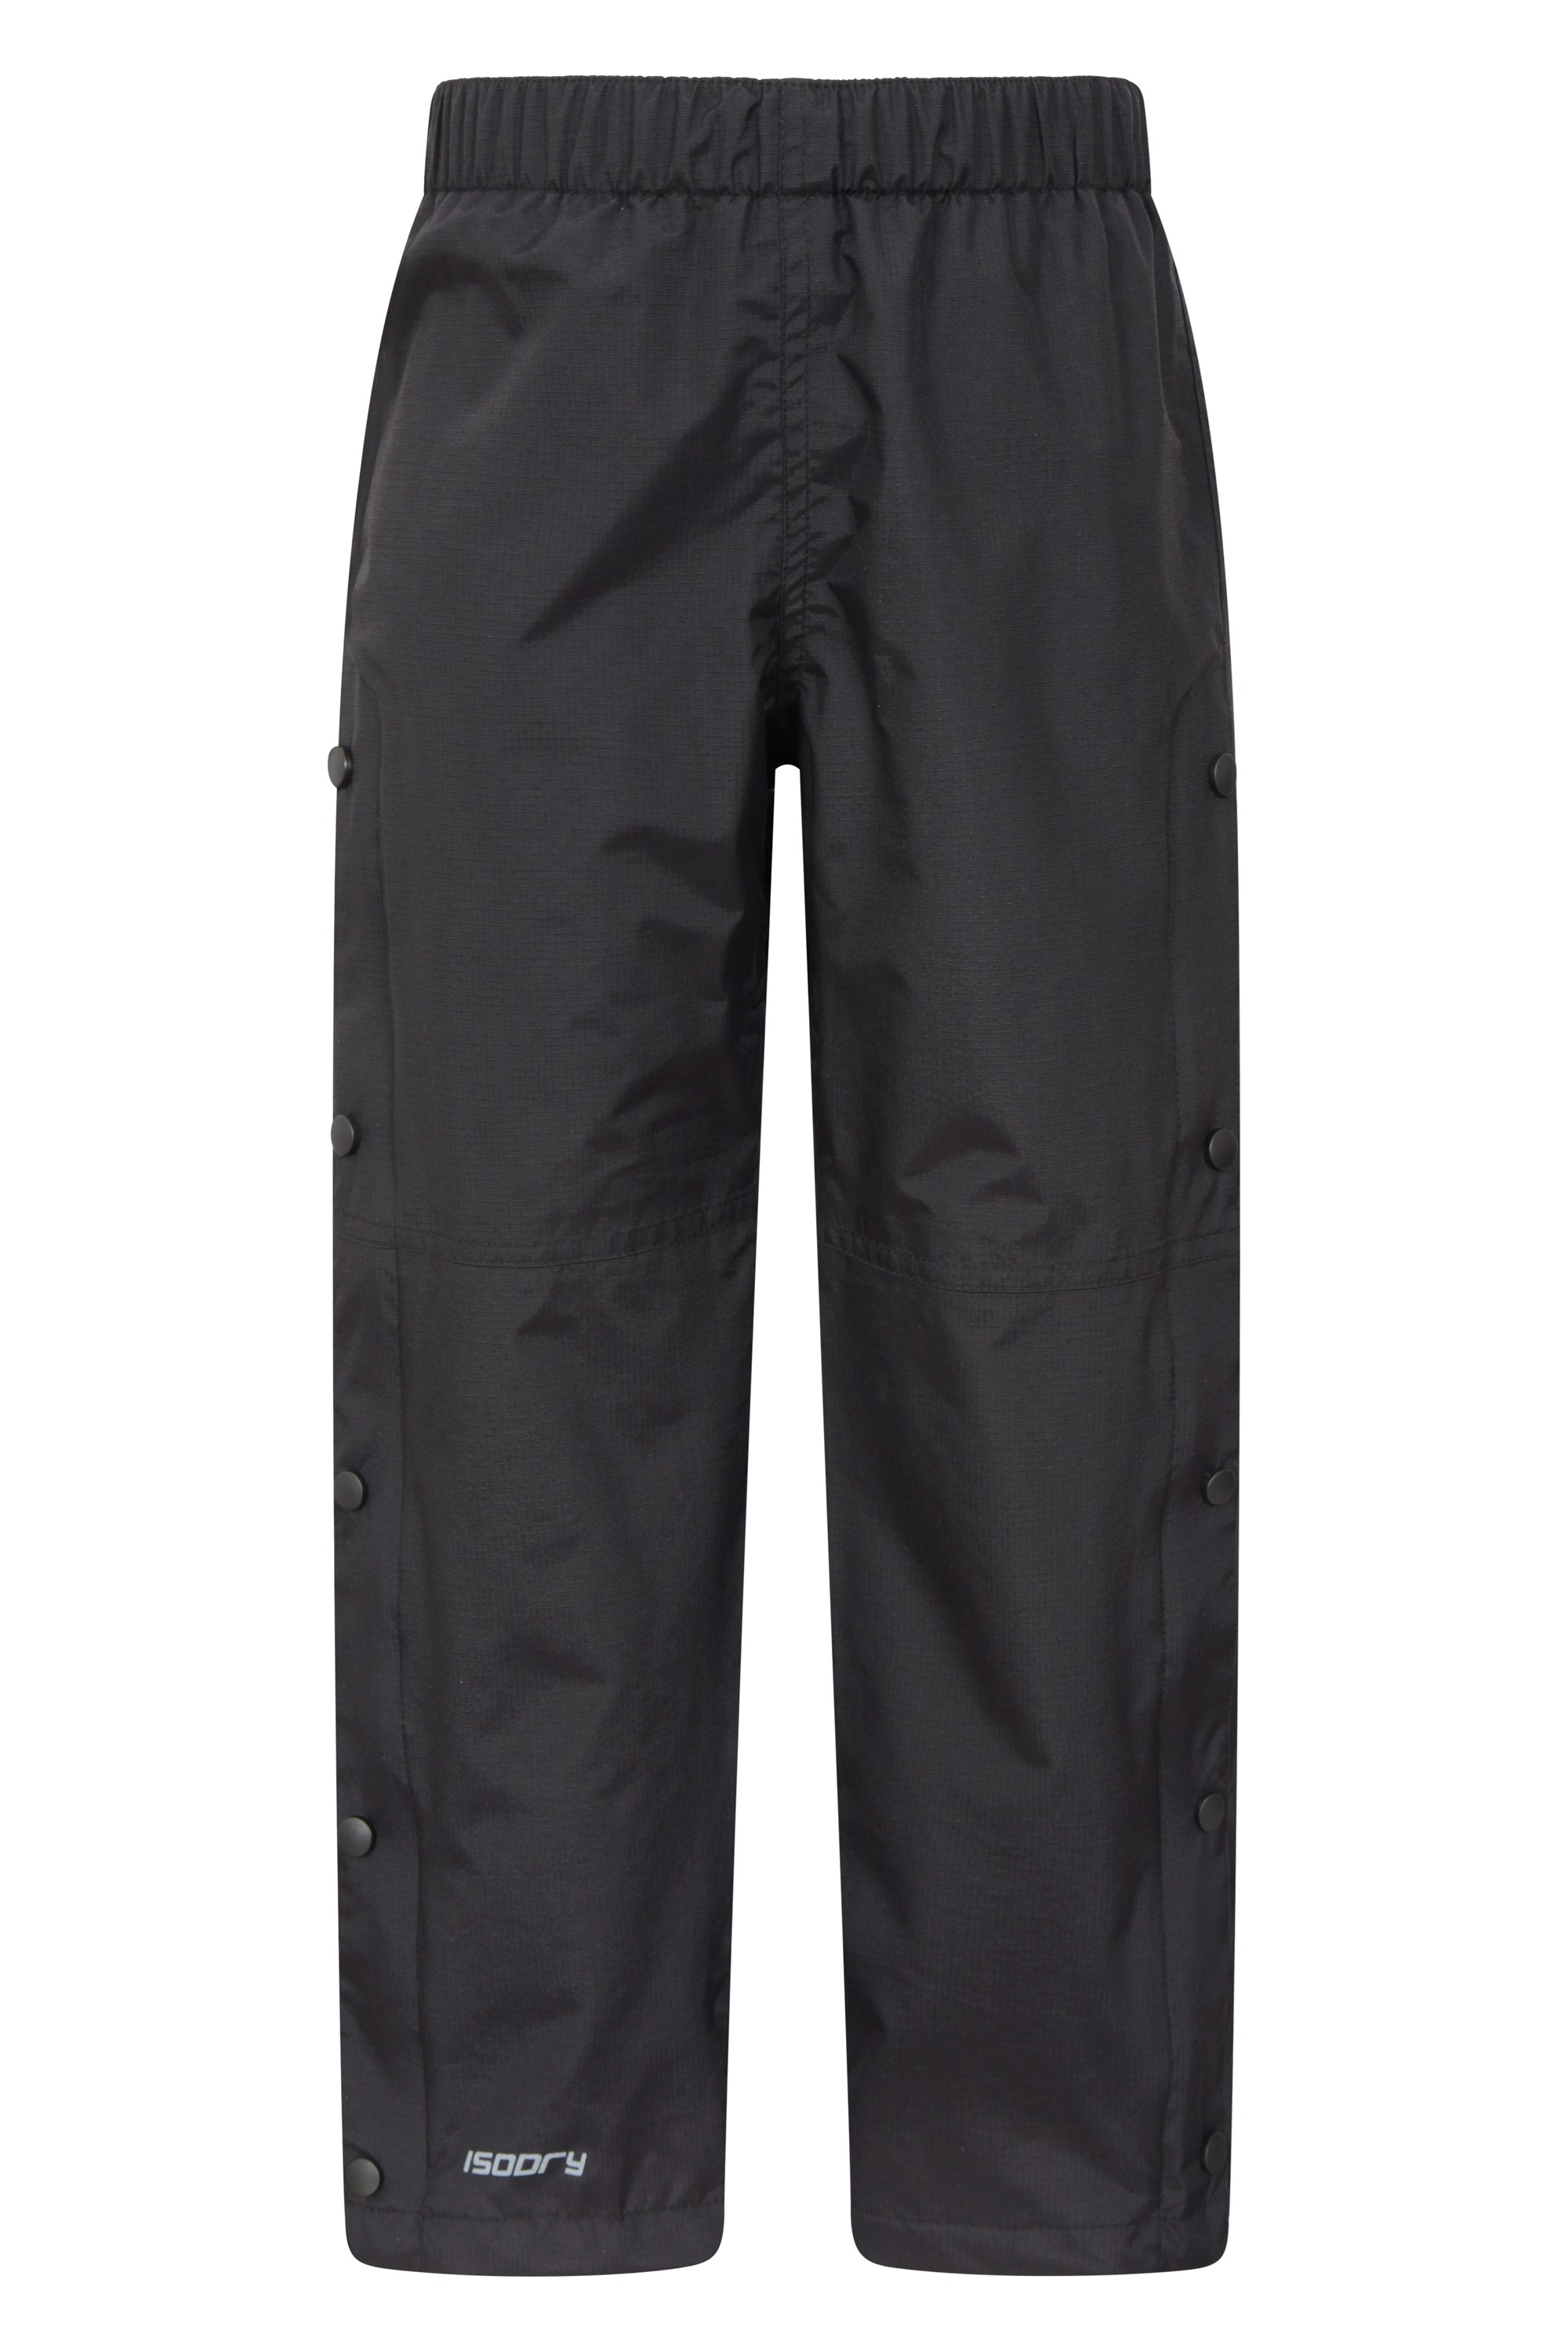 Black Water Resistant Over Trousers | Scicon Sports